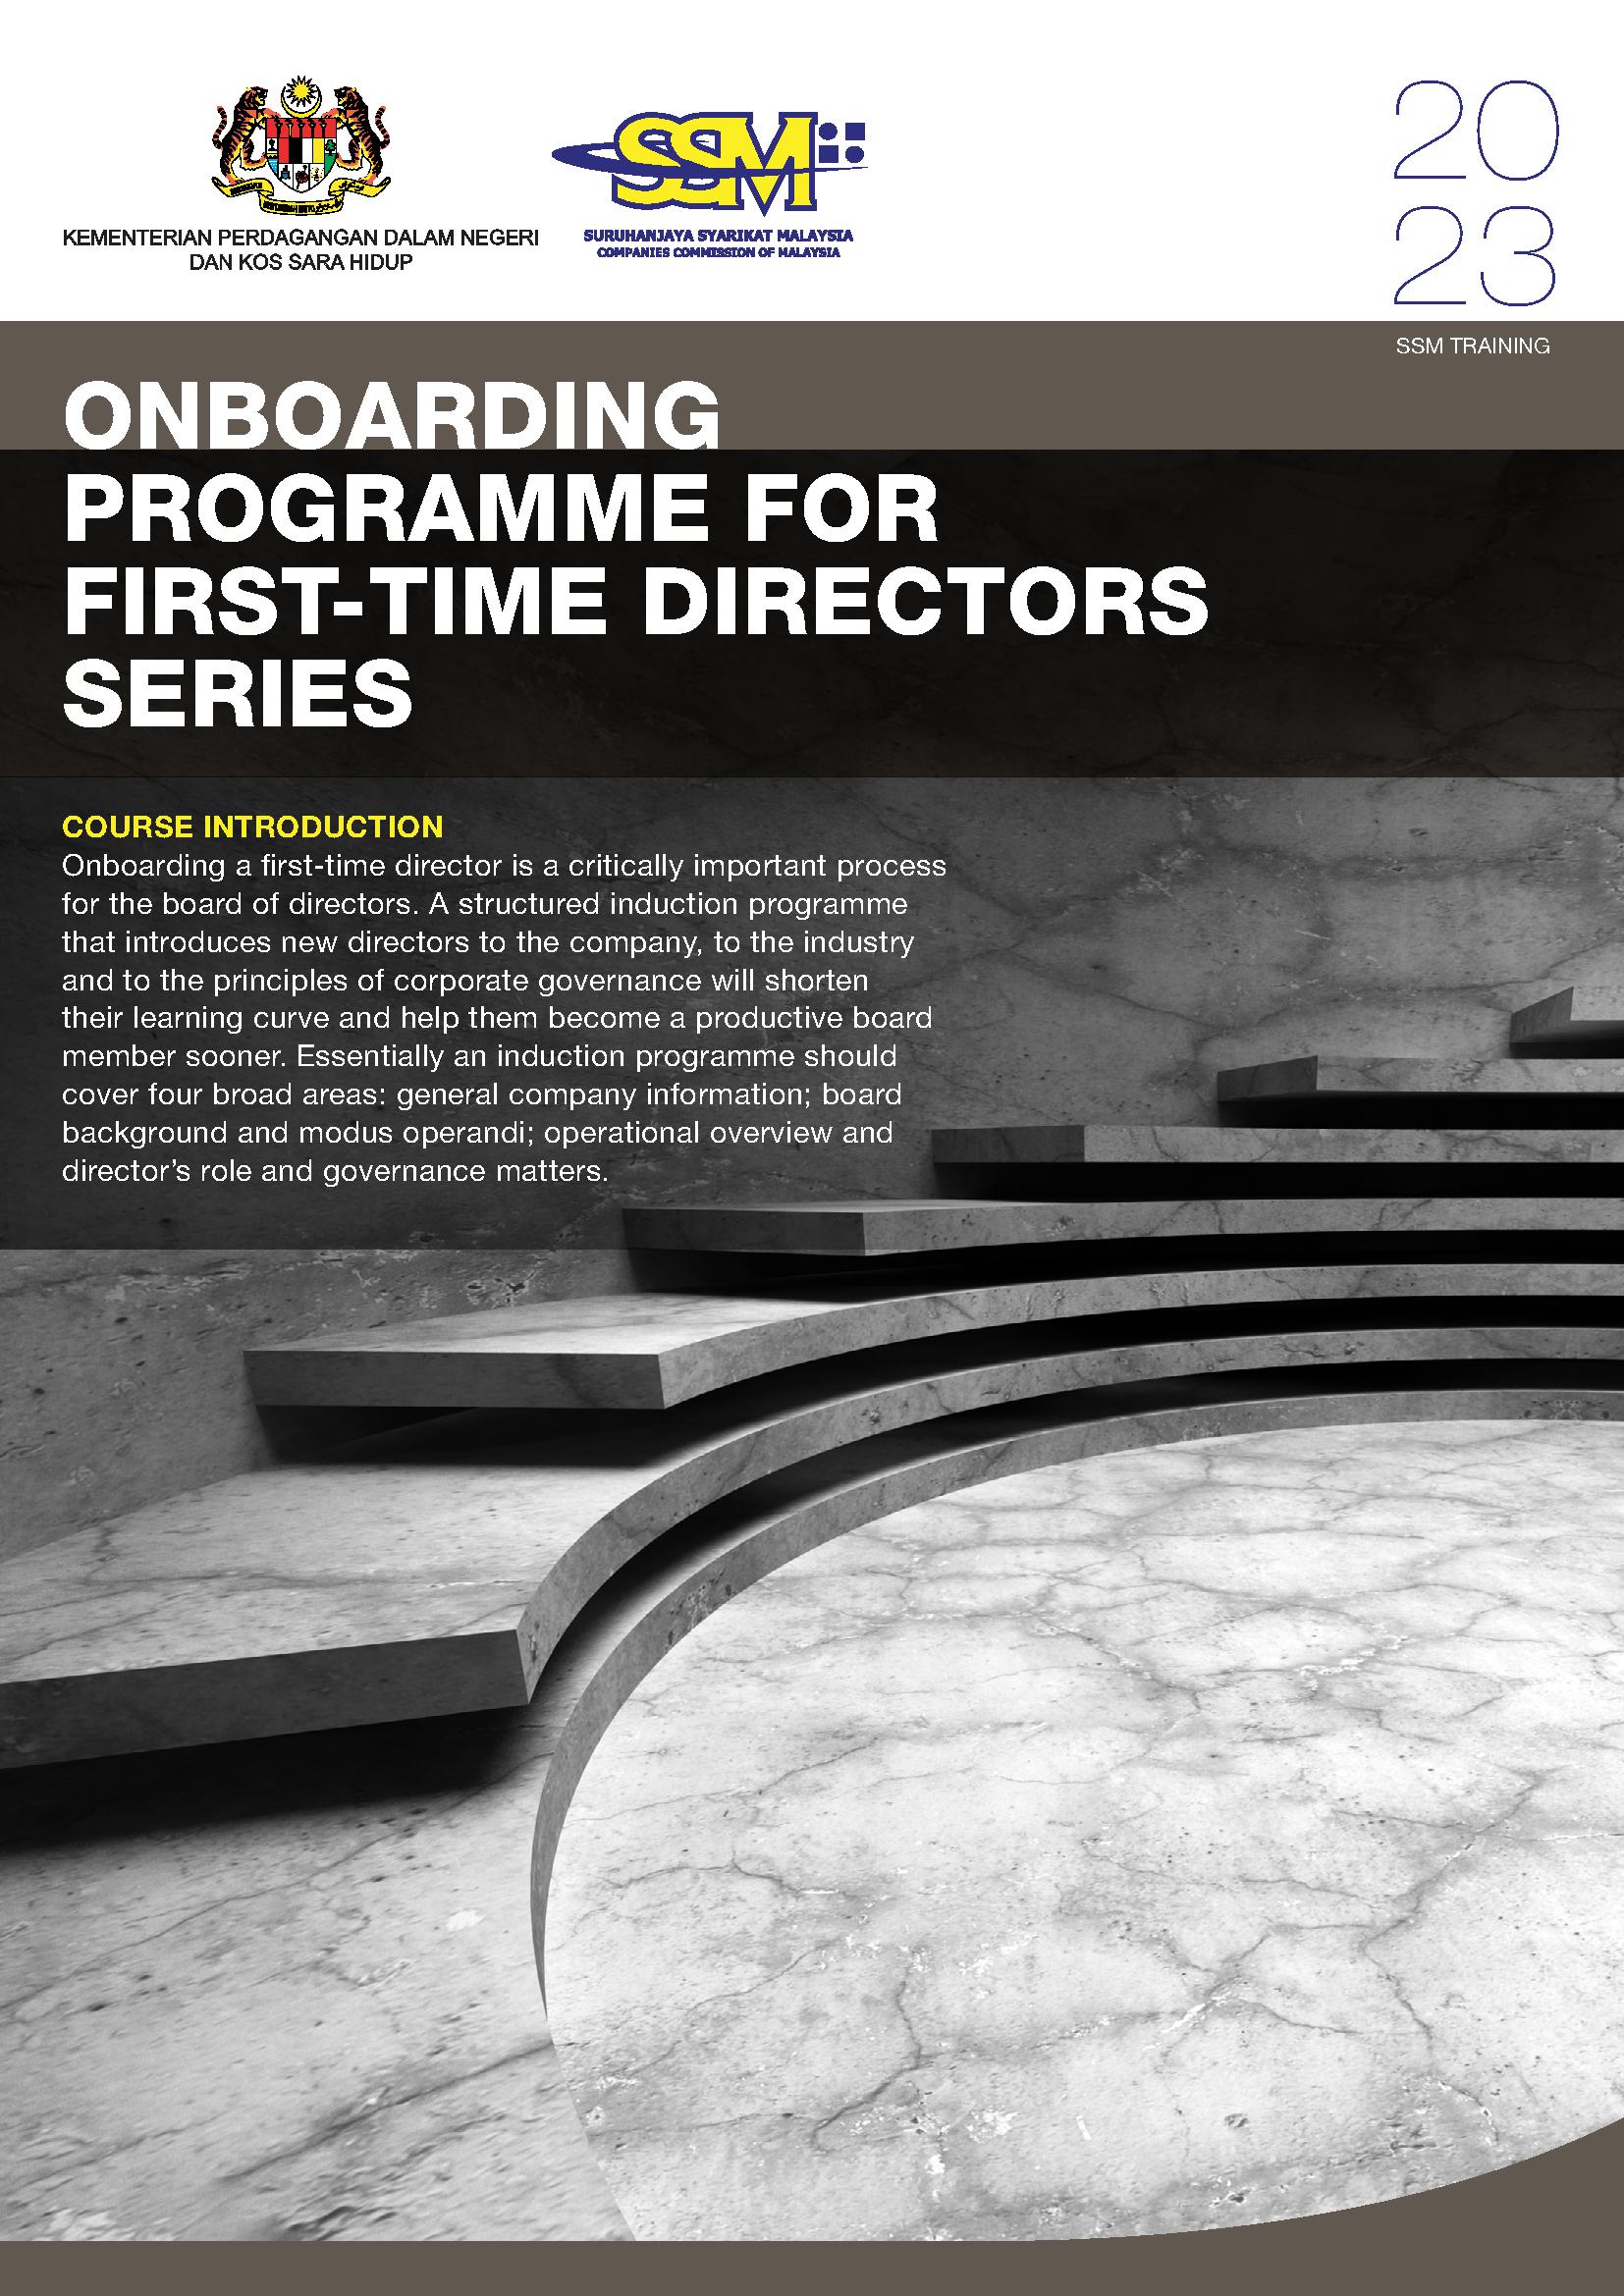 ONBOARDING PROGRAMMME FOR FIRST-TIME DIRECTORS SERIES.jpg